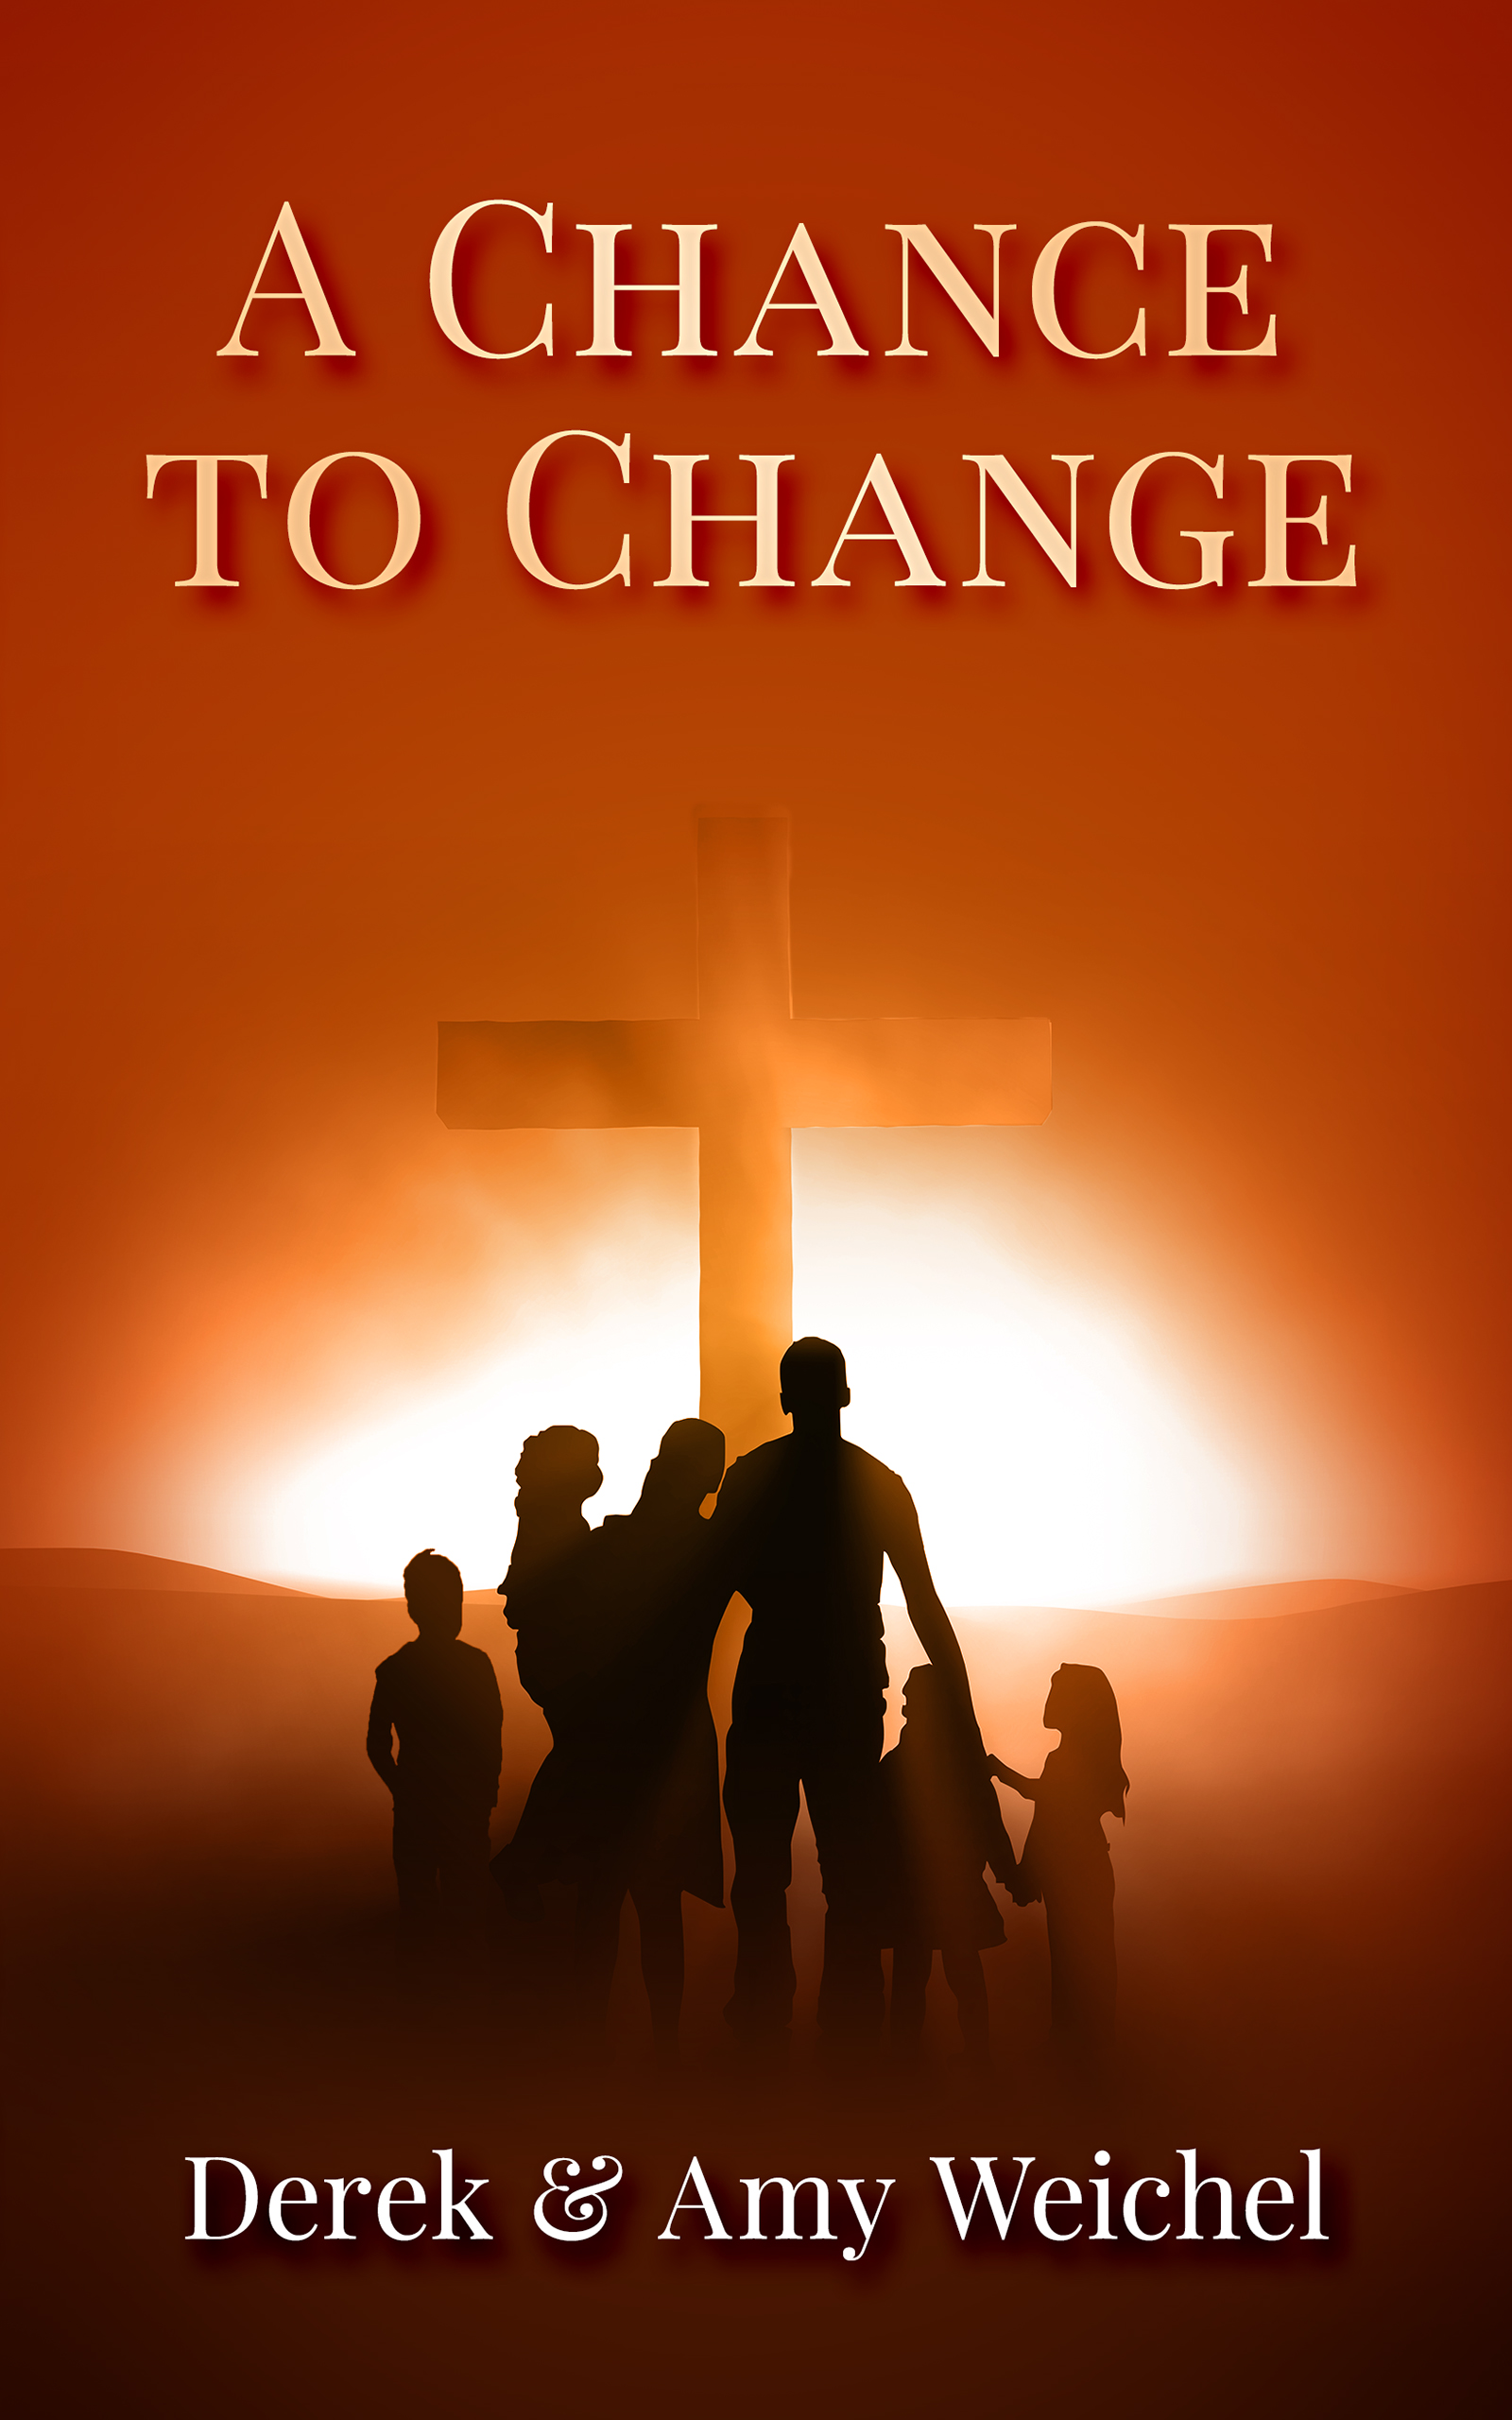 A Chance to Change by Derek and Amy Weichel